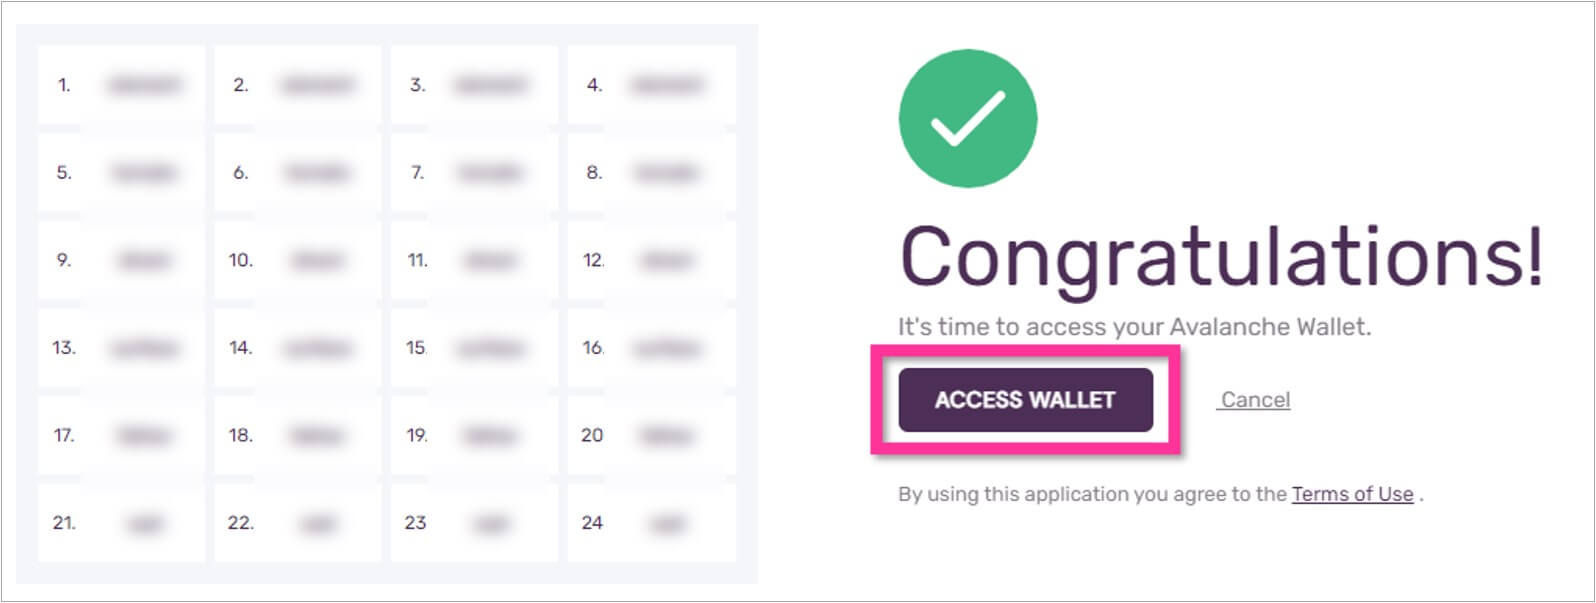 「ACCESS WALLET」を選択